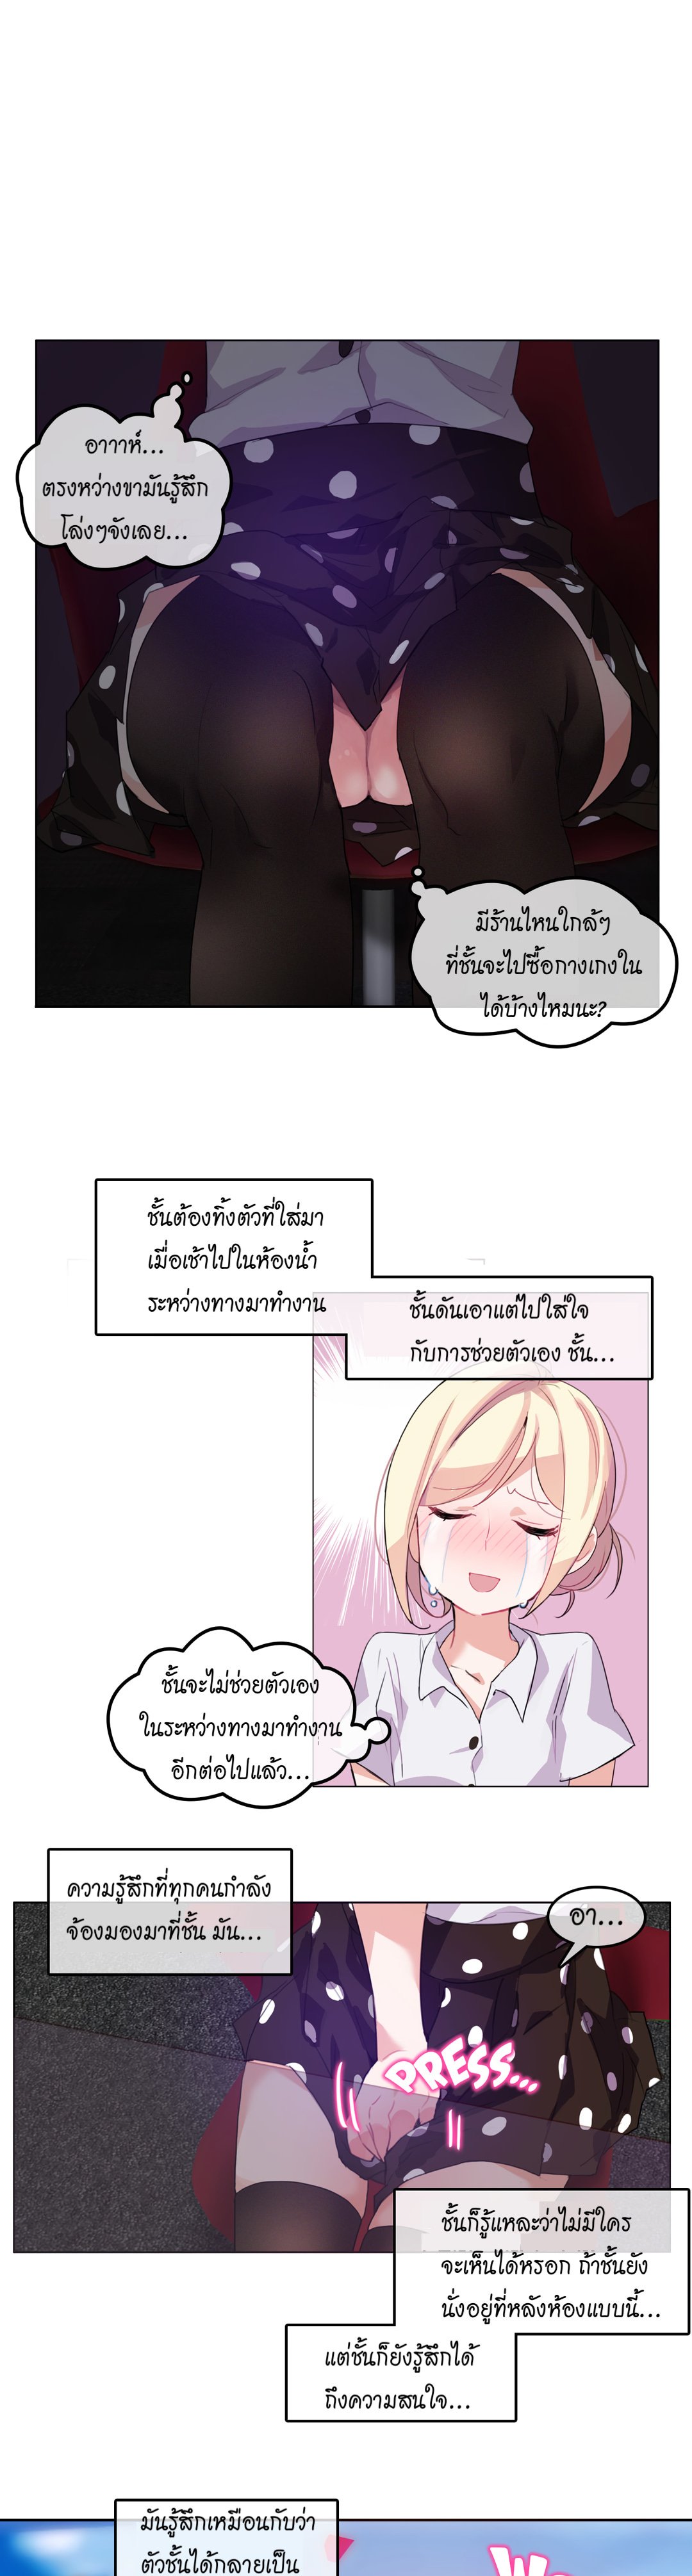 A Pervert’s Daily Life 3 (2)